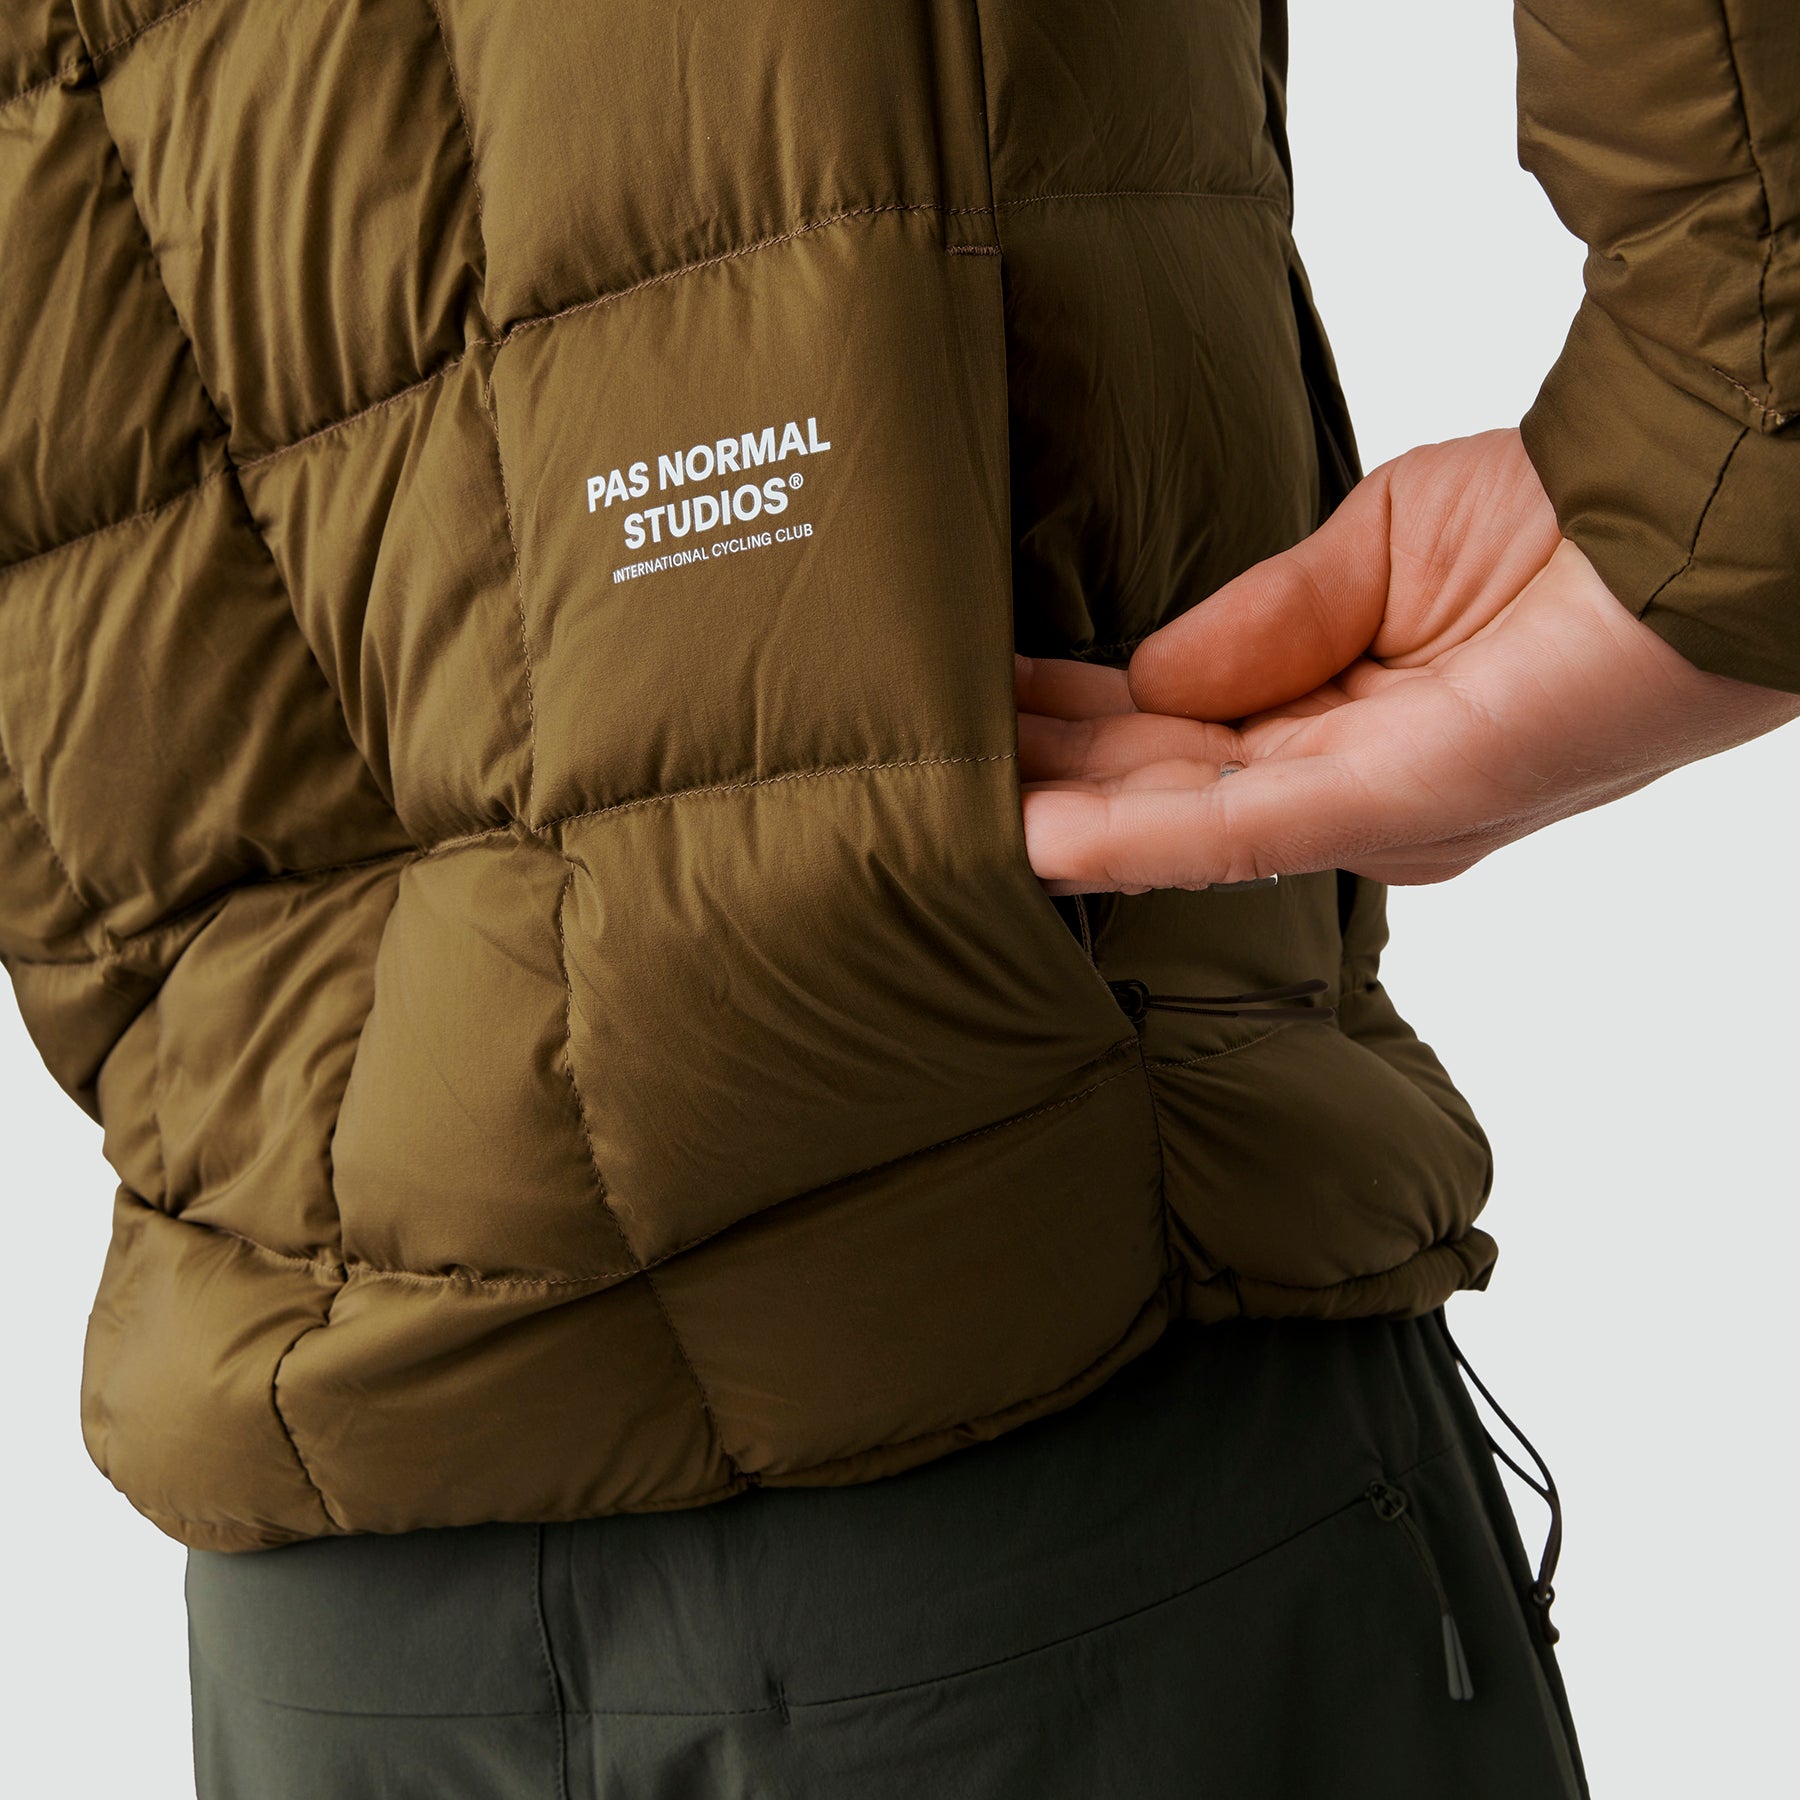 Off-Race Down Jacket - Army Brown